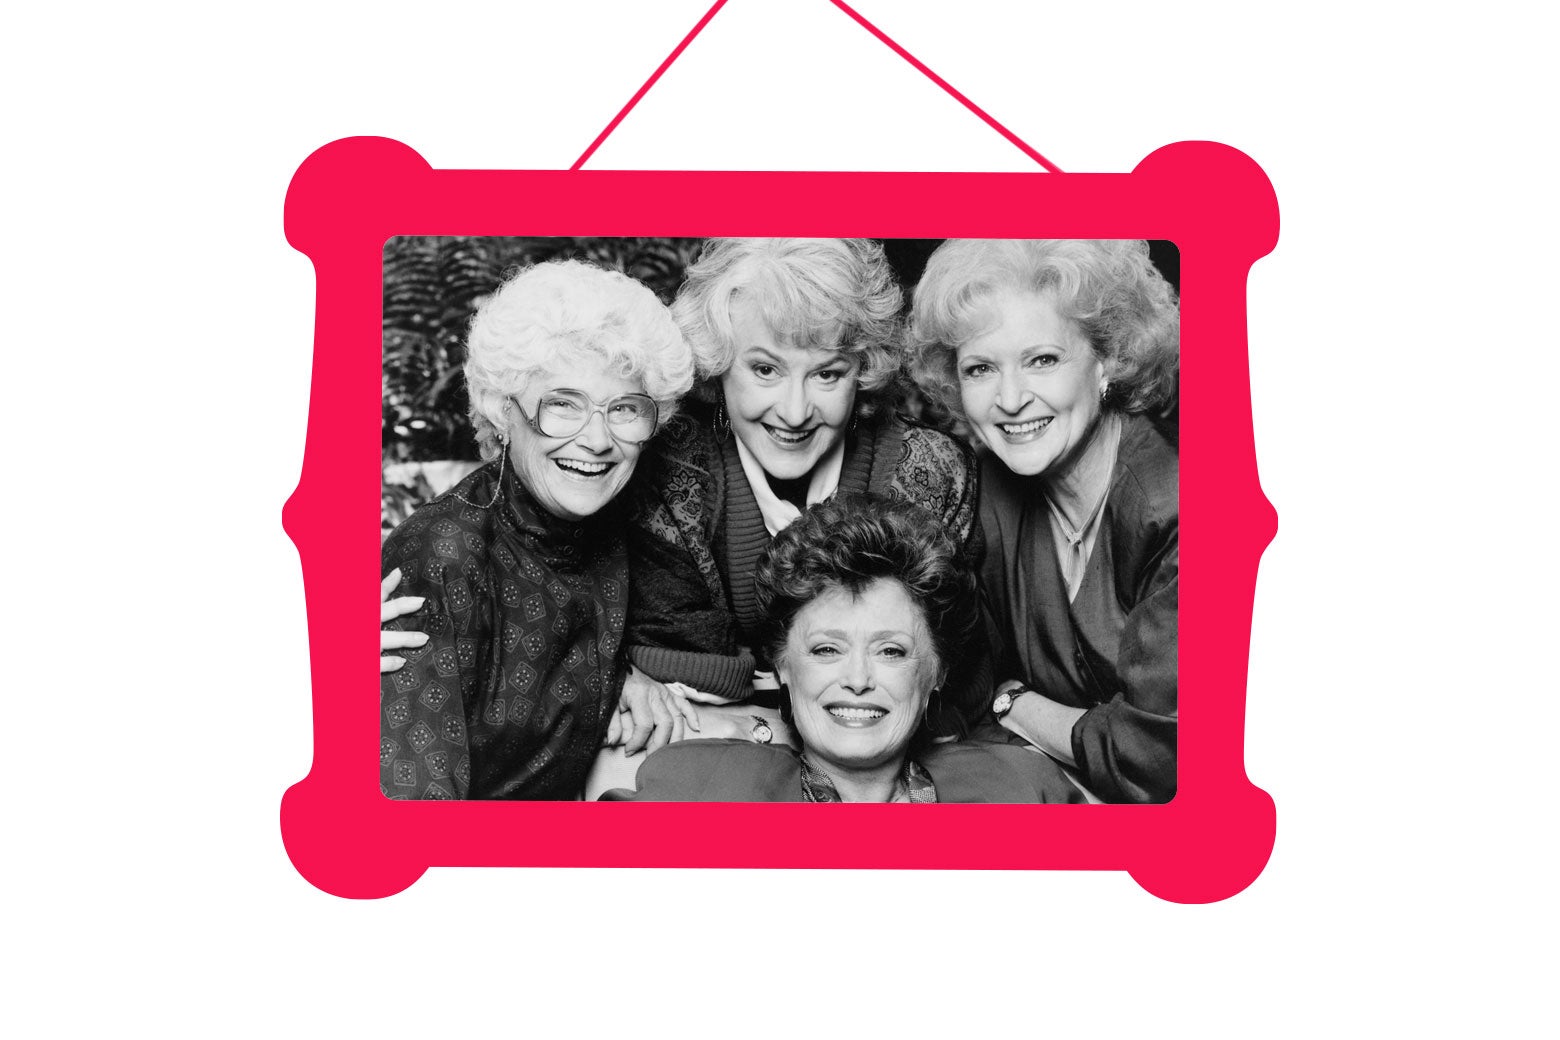 The Golden Girls cast smiling in a photo hung in a picture frame.